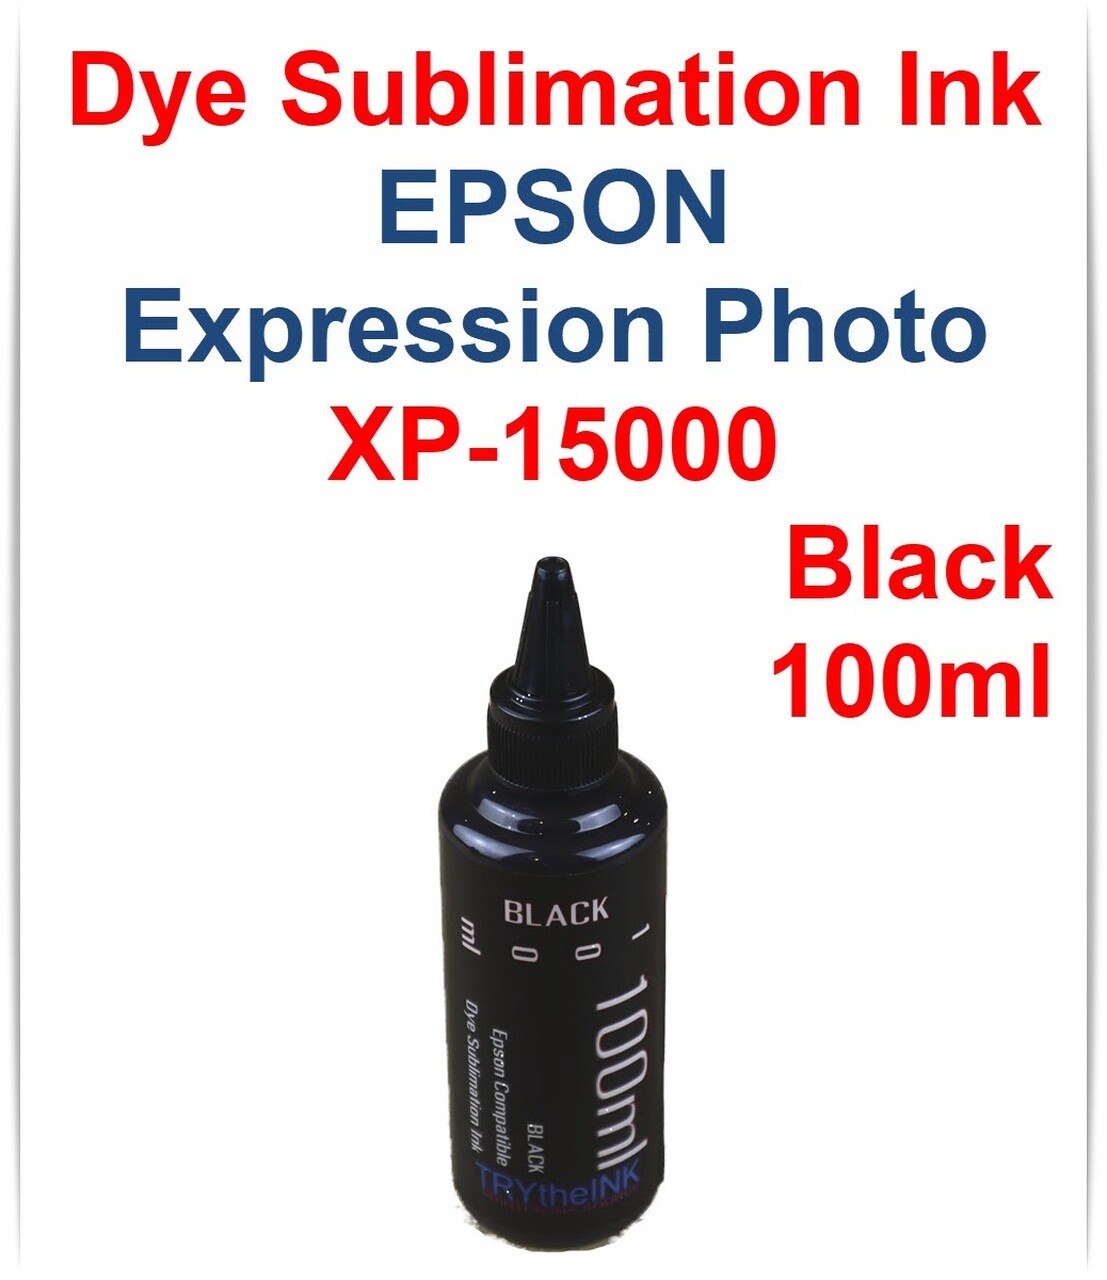 Black Dye Sublimation Ink 100ml for Epson Expression Photo HD XP-15000 printer